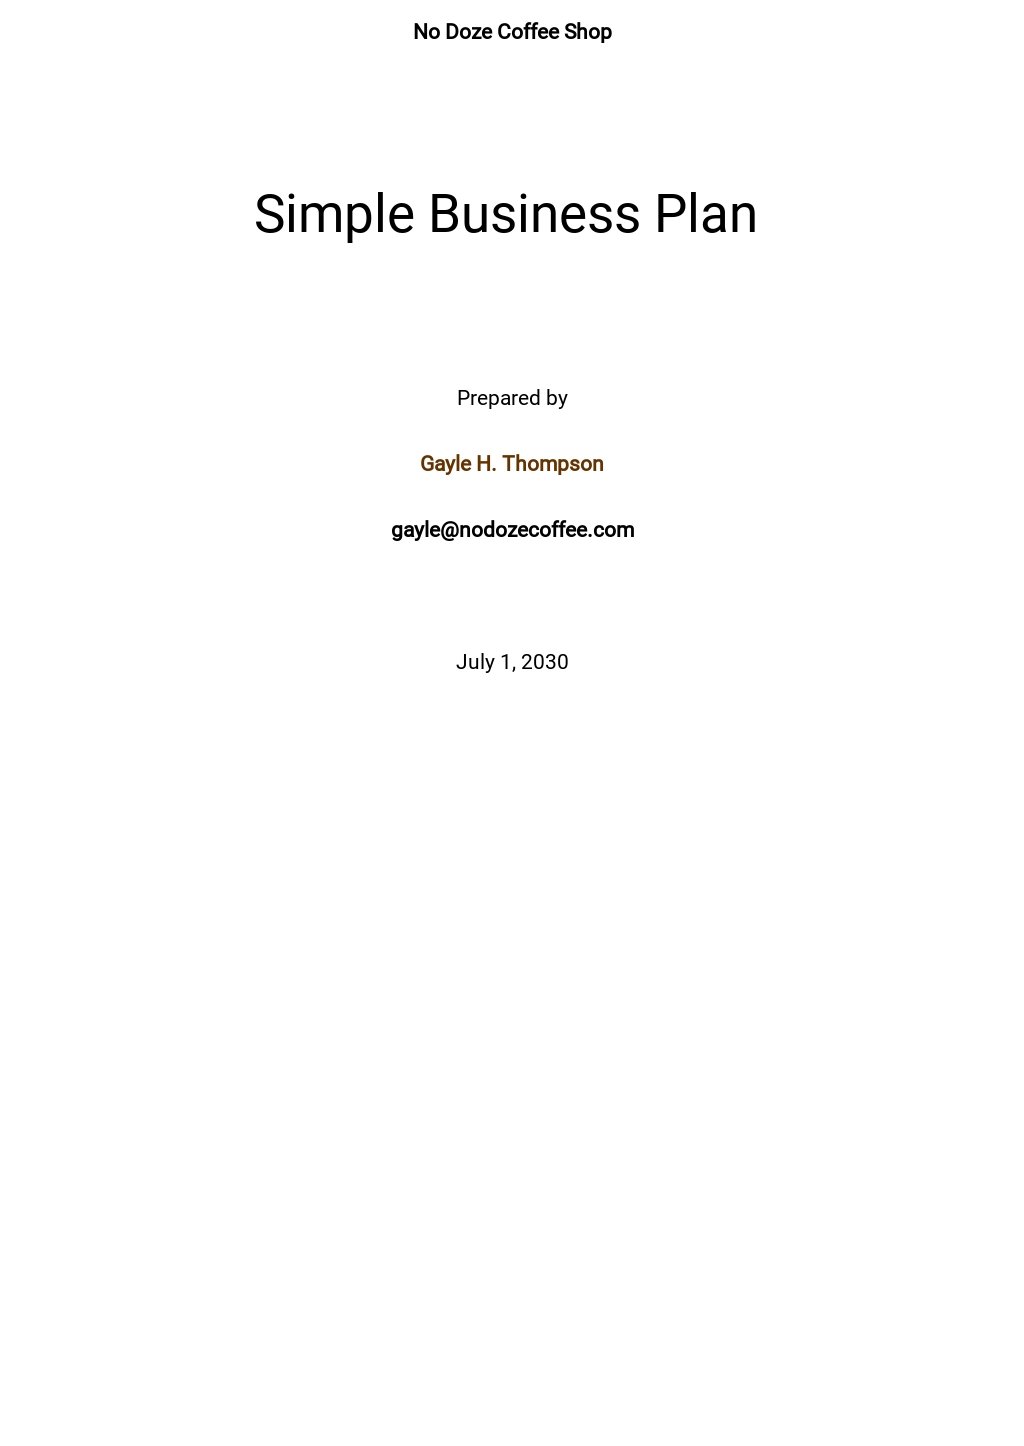 Simple business plan template free fill in the blank